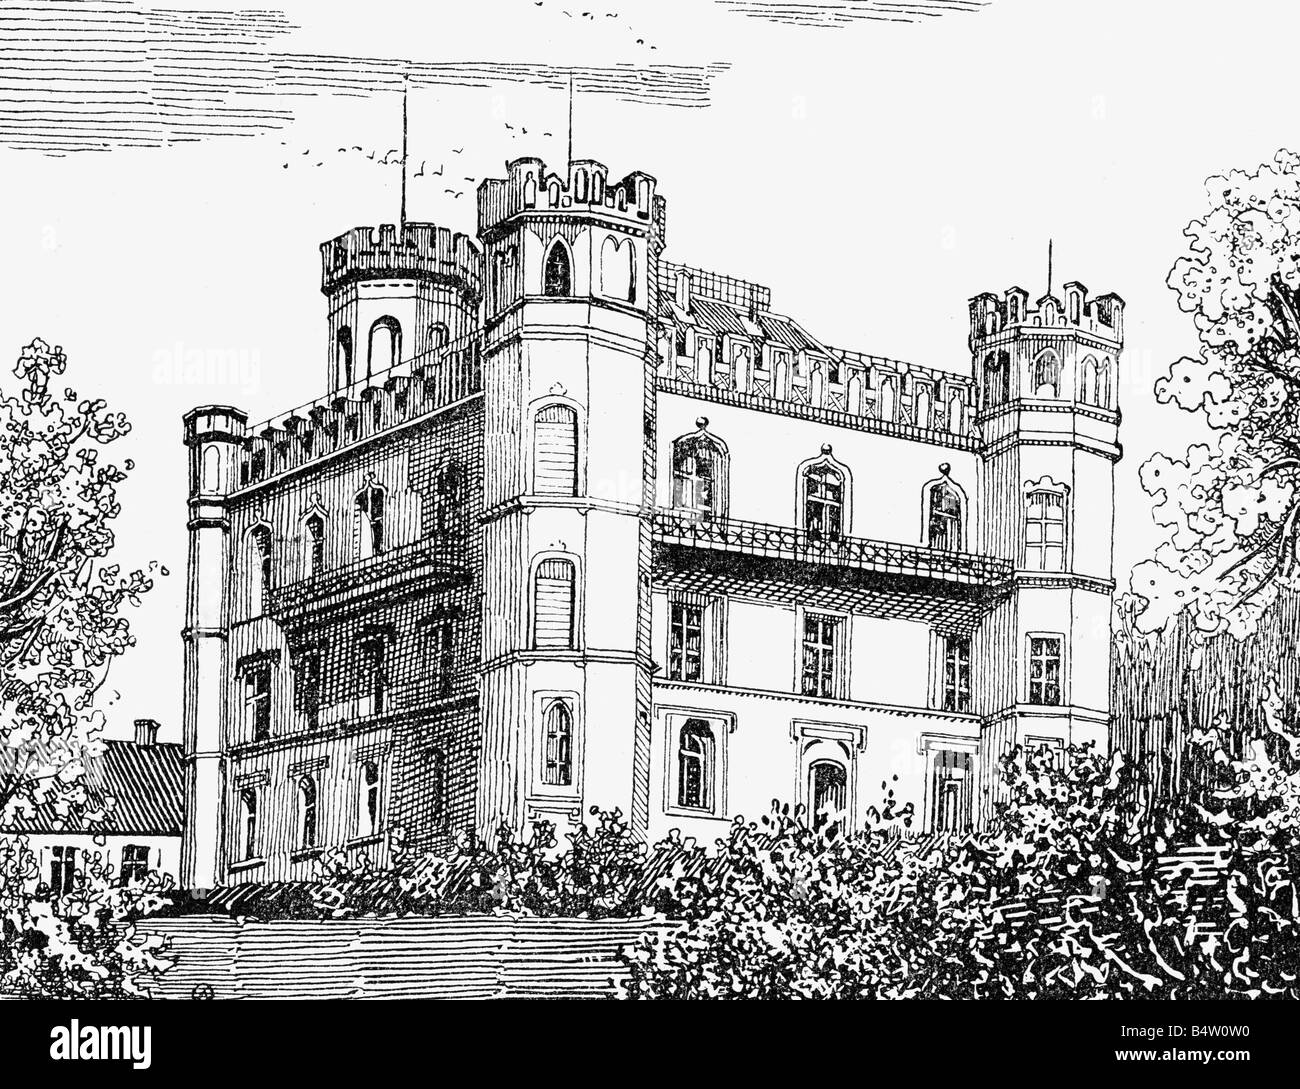 architecture, castles, Germany, Bavaria, Berg Castle, drawing, circa